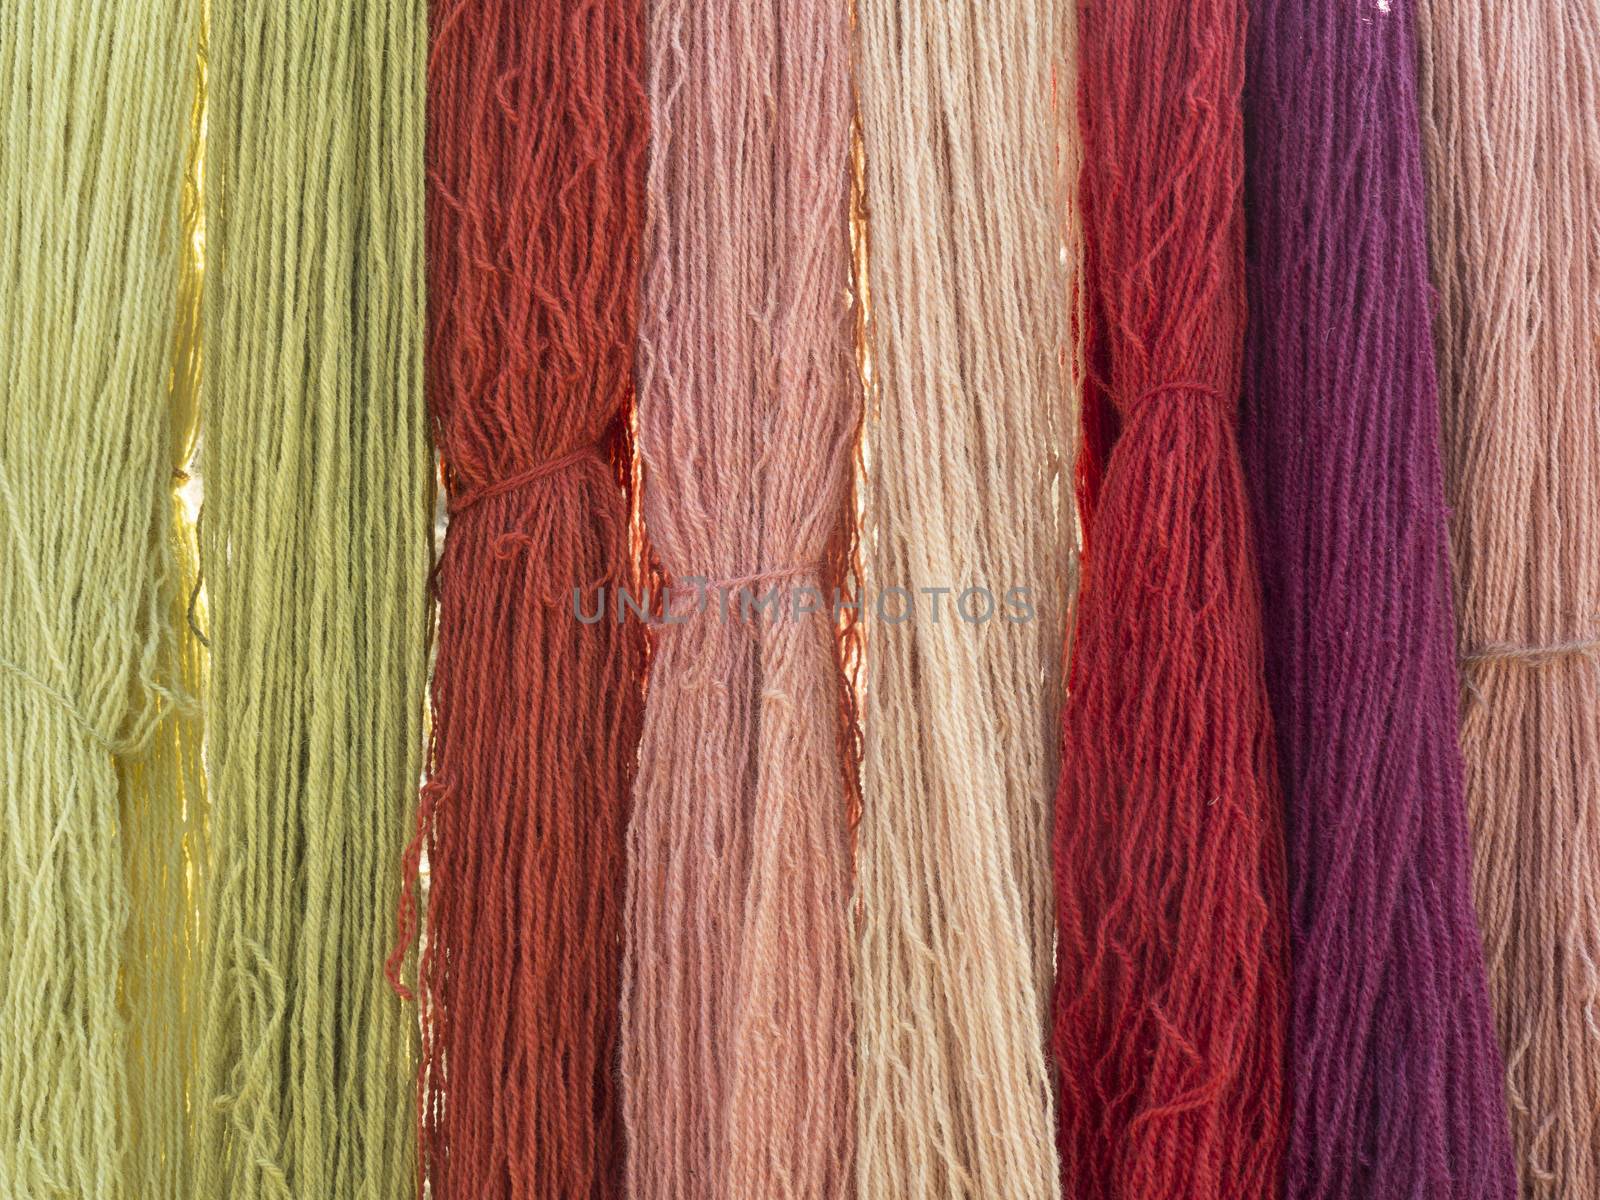 Vegetable dyed wool by ABCDK